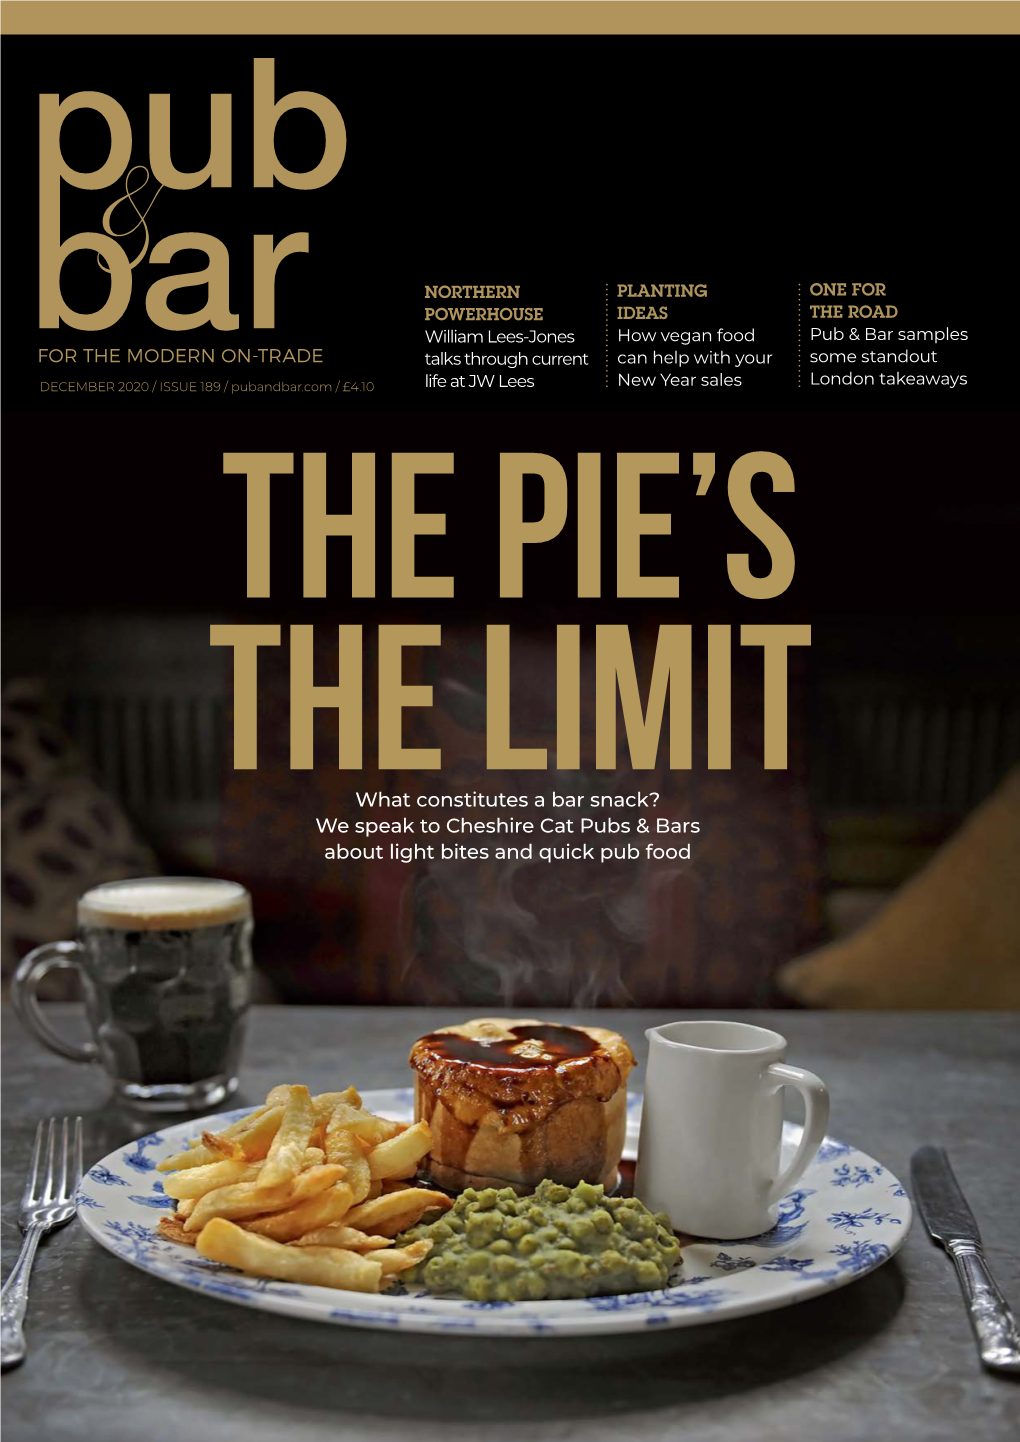 What Constitutes a Bar Snack? We Speak to Cheshire Cat Pubs & Bars About Light Bites and Quick Pub Food